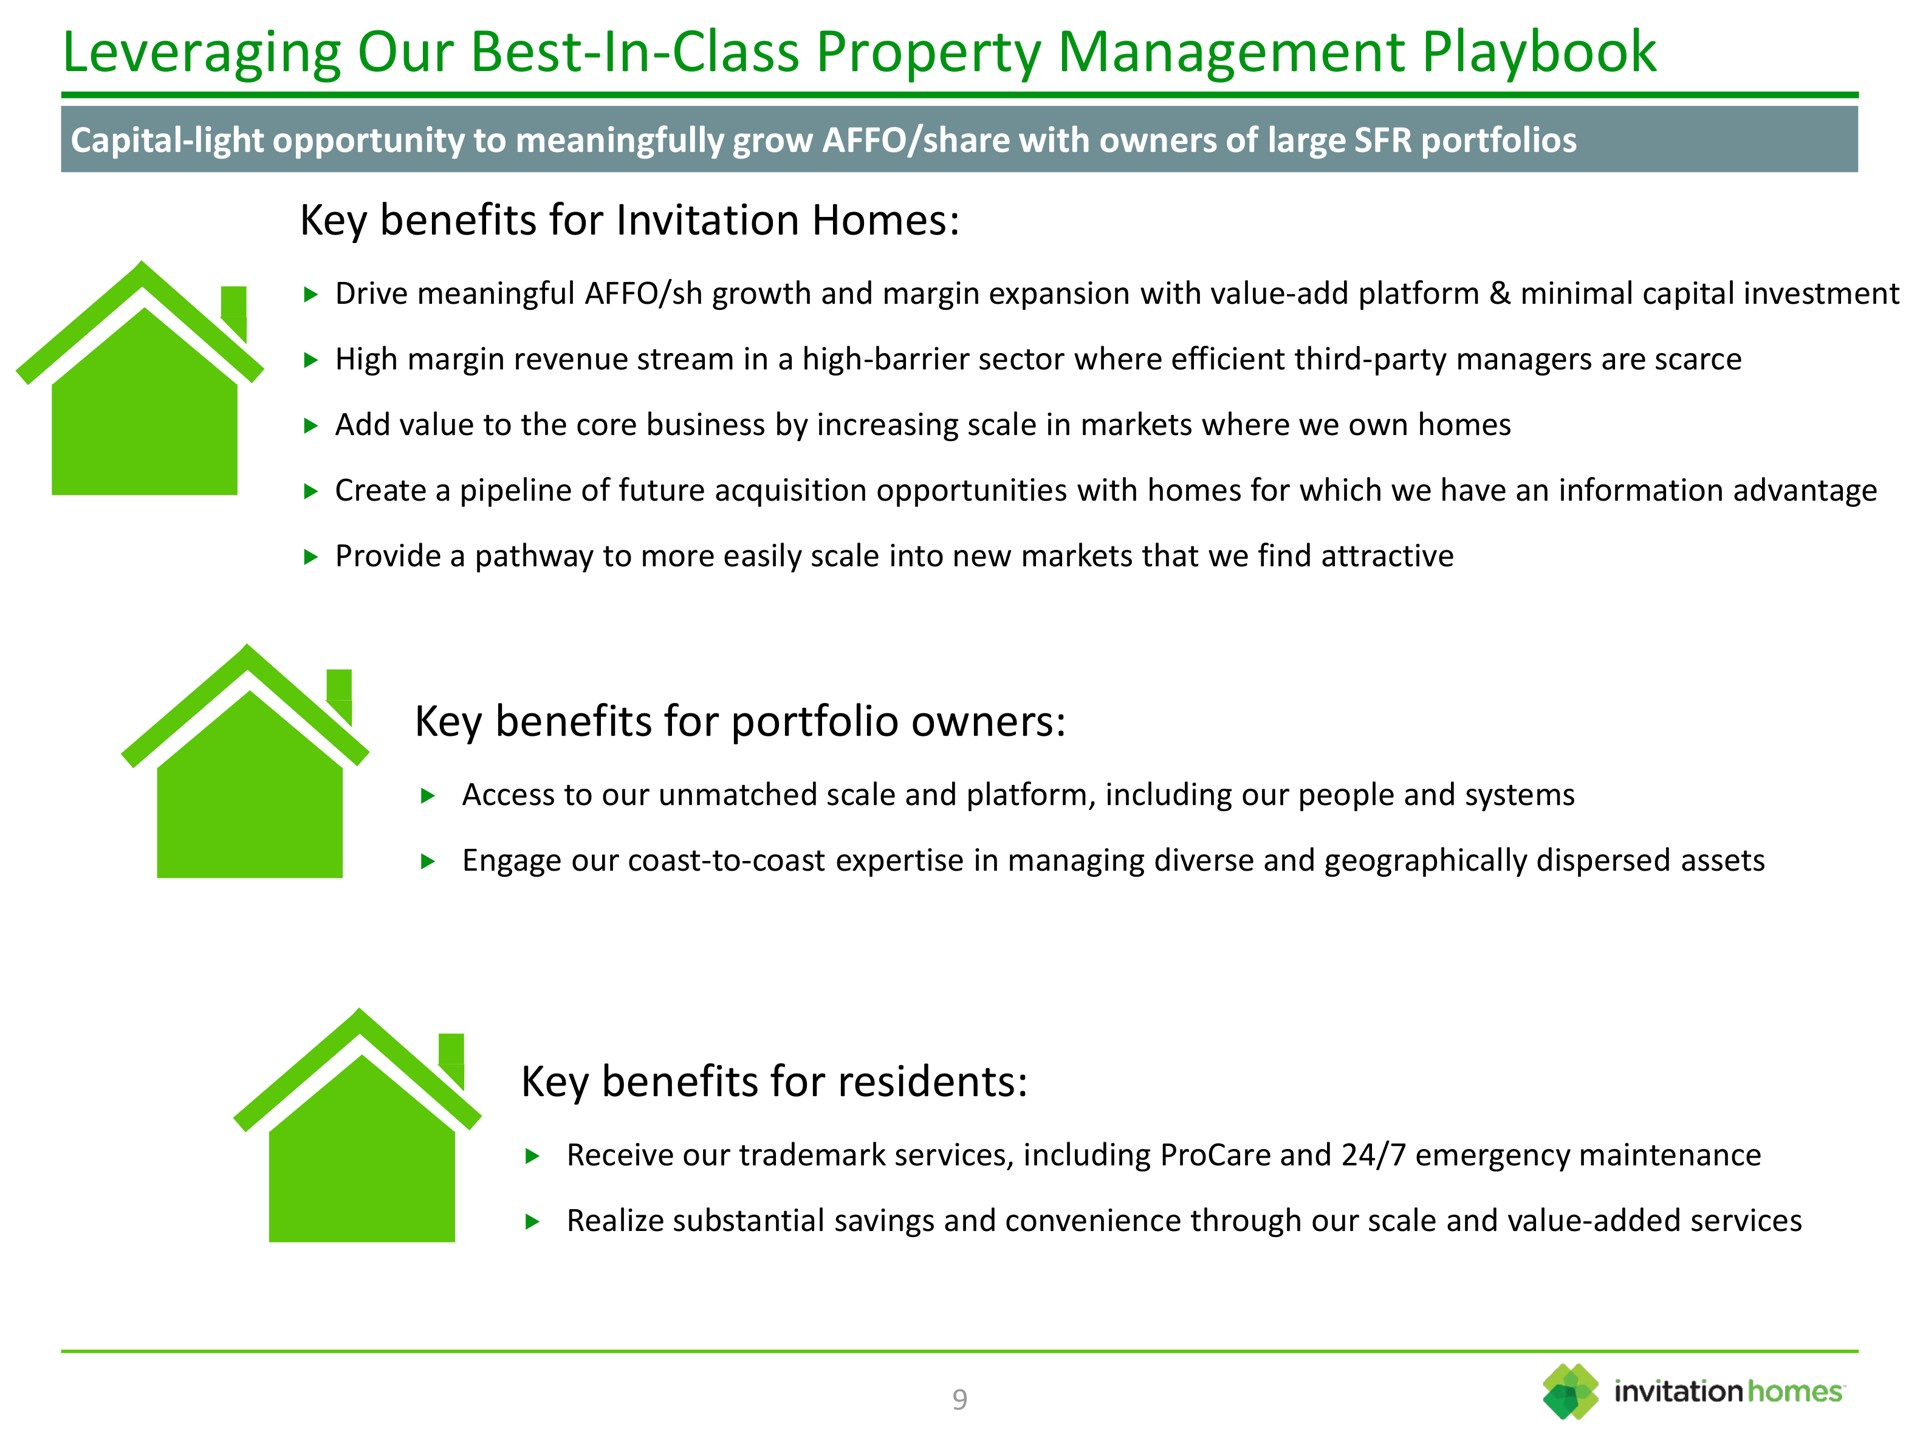 leveraging our best in class property management playbook key benefits for invitation homes key benefits for portfolio owners key benefits for residents in | Invitation Homes